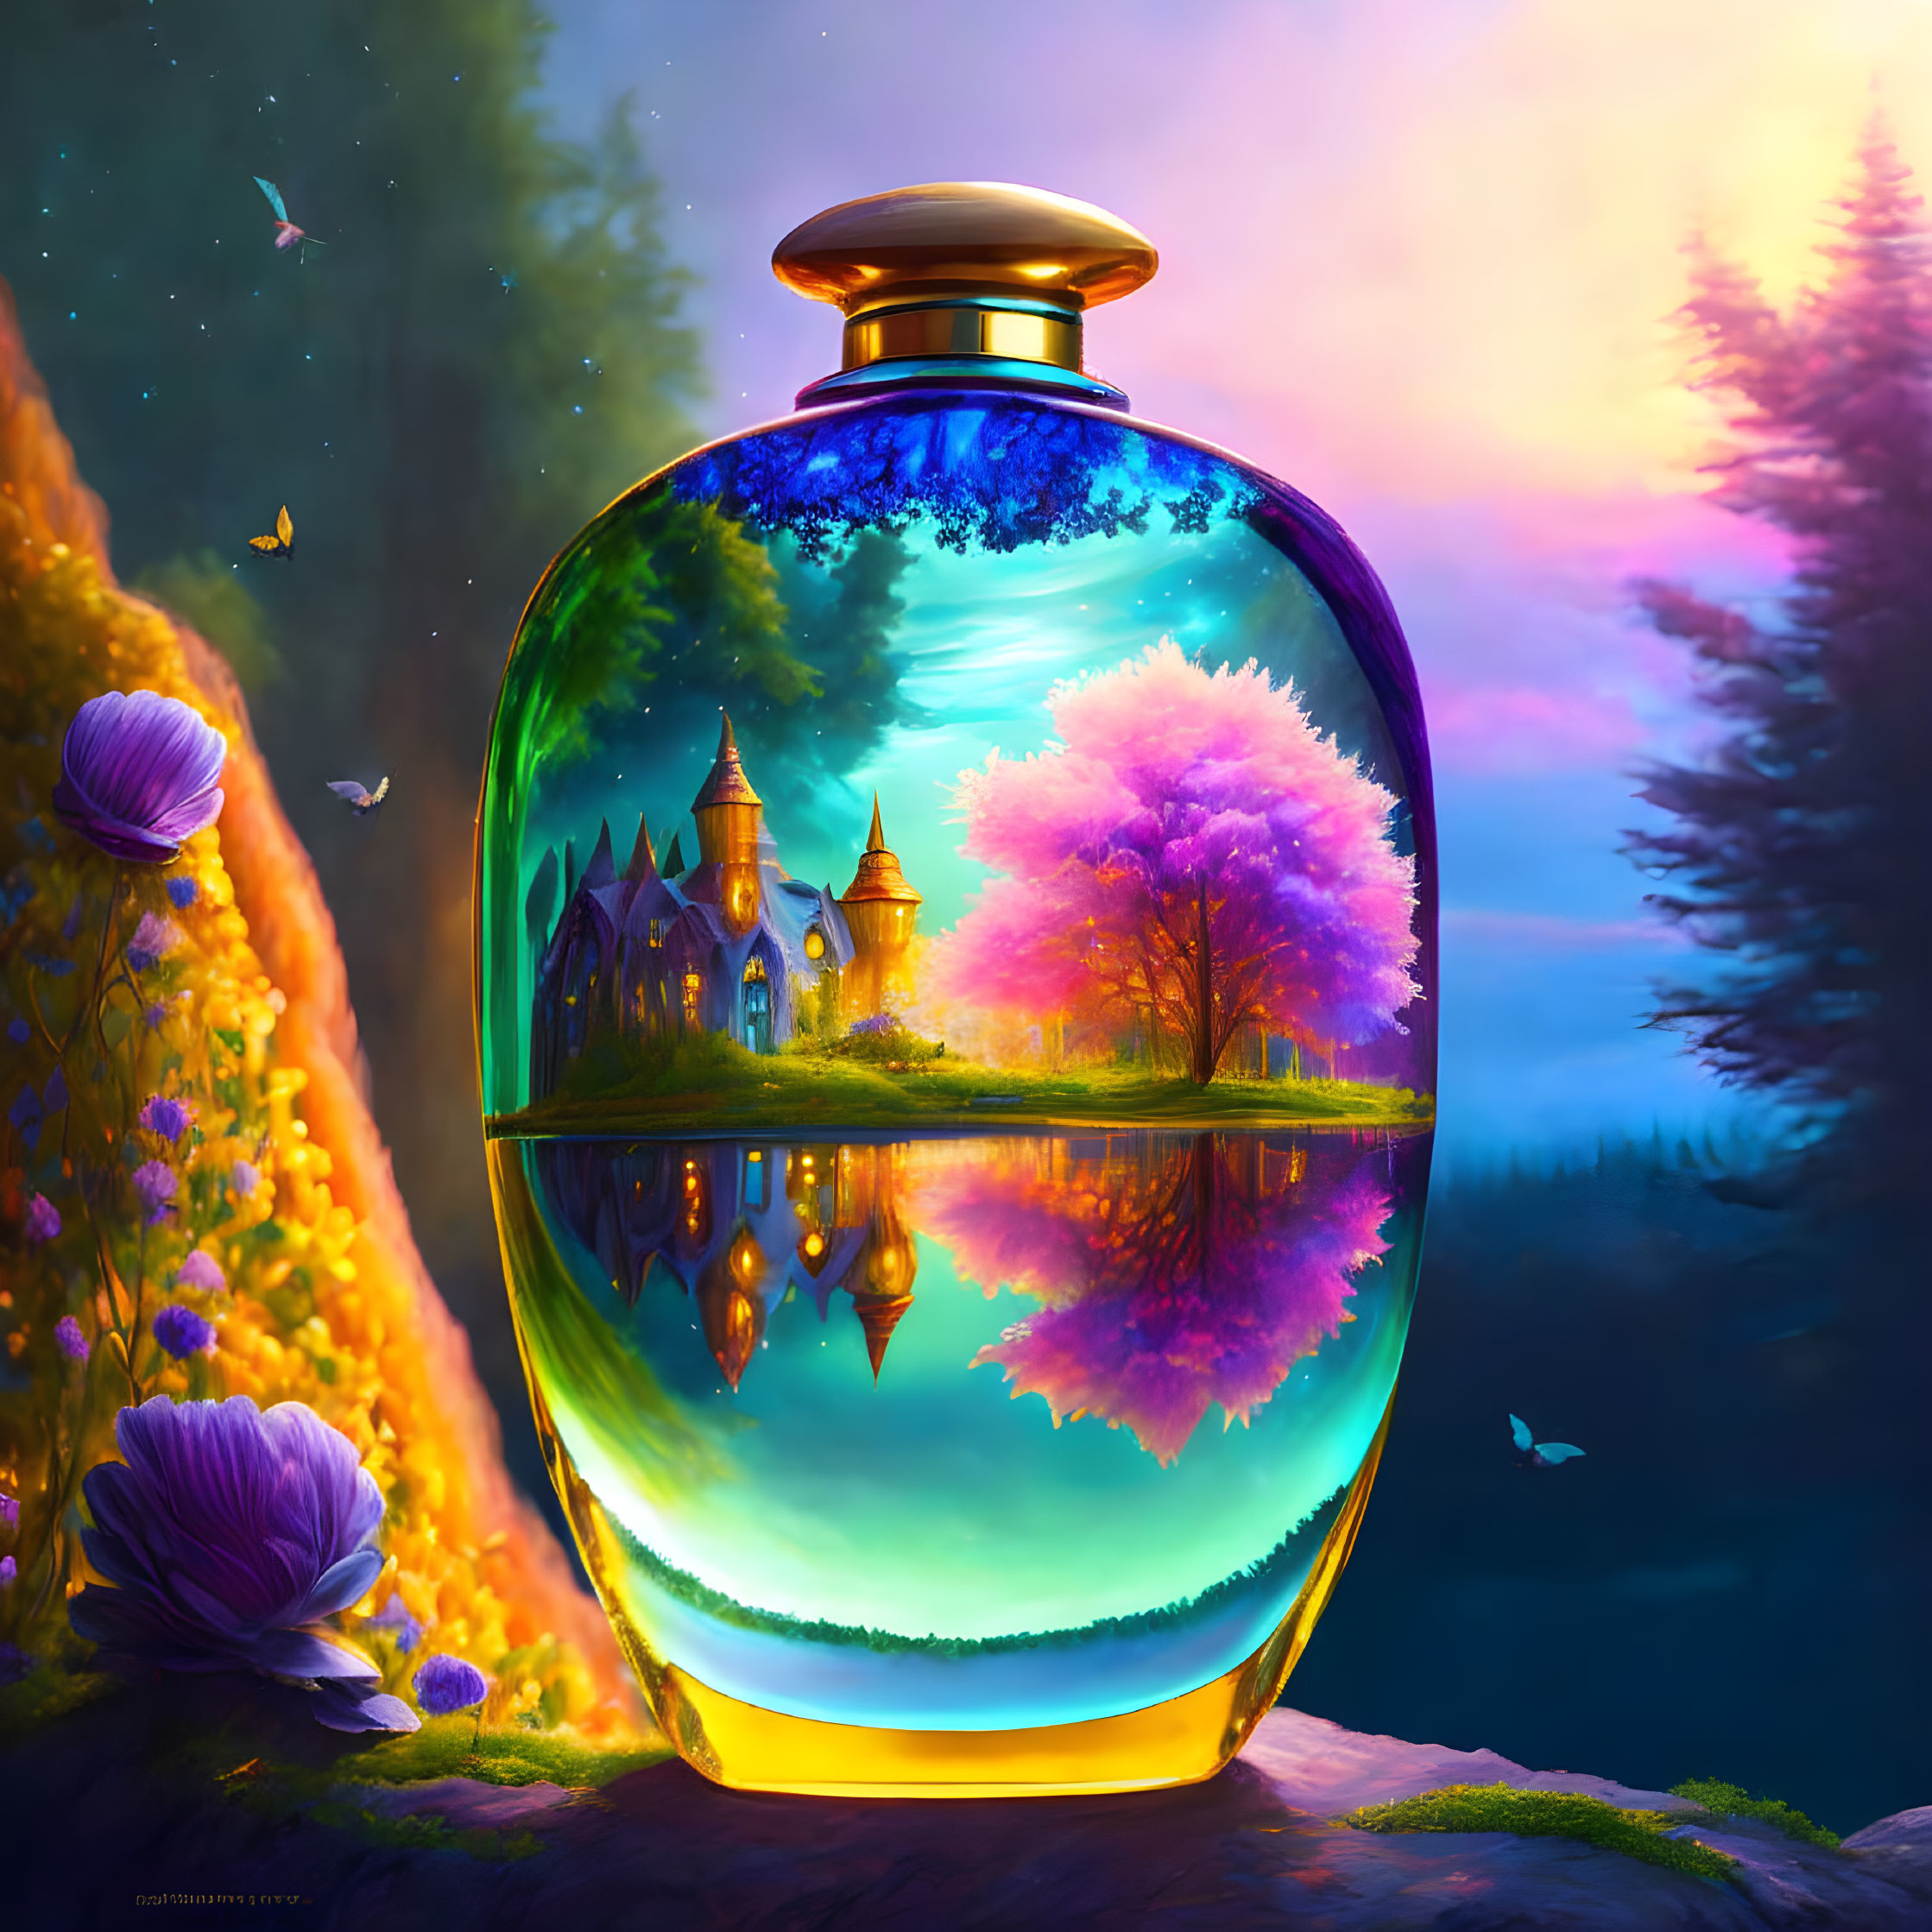 Illustration of magical perfume bottle with castle reflection in twilight sky